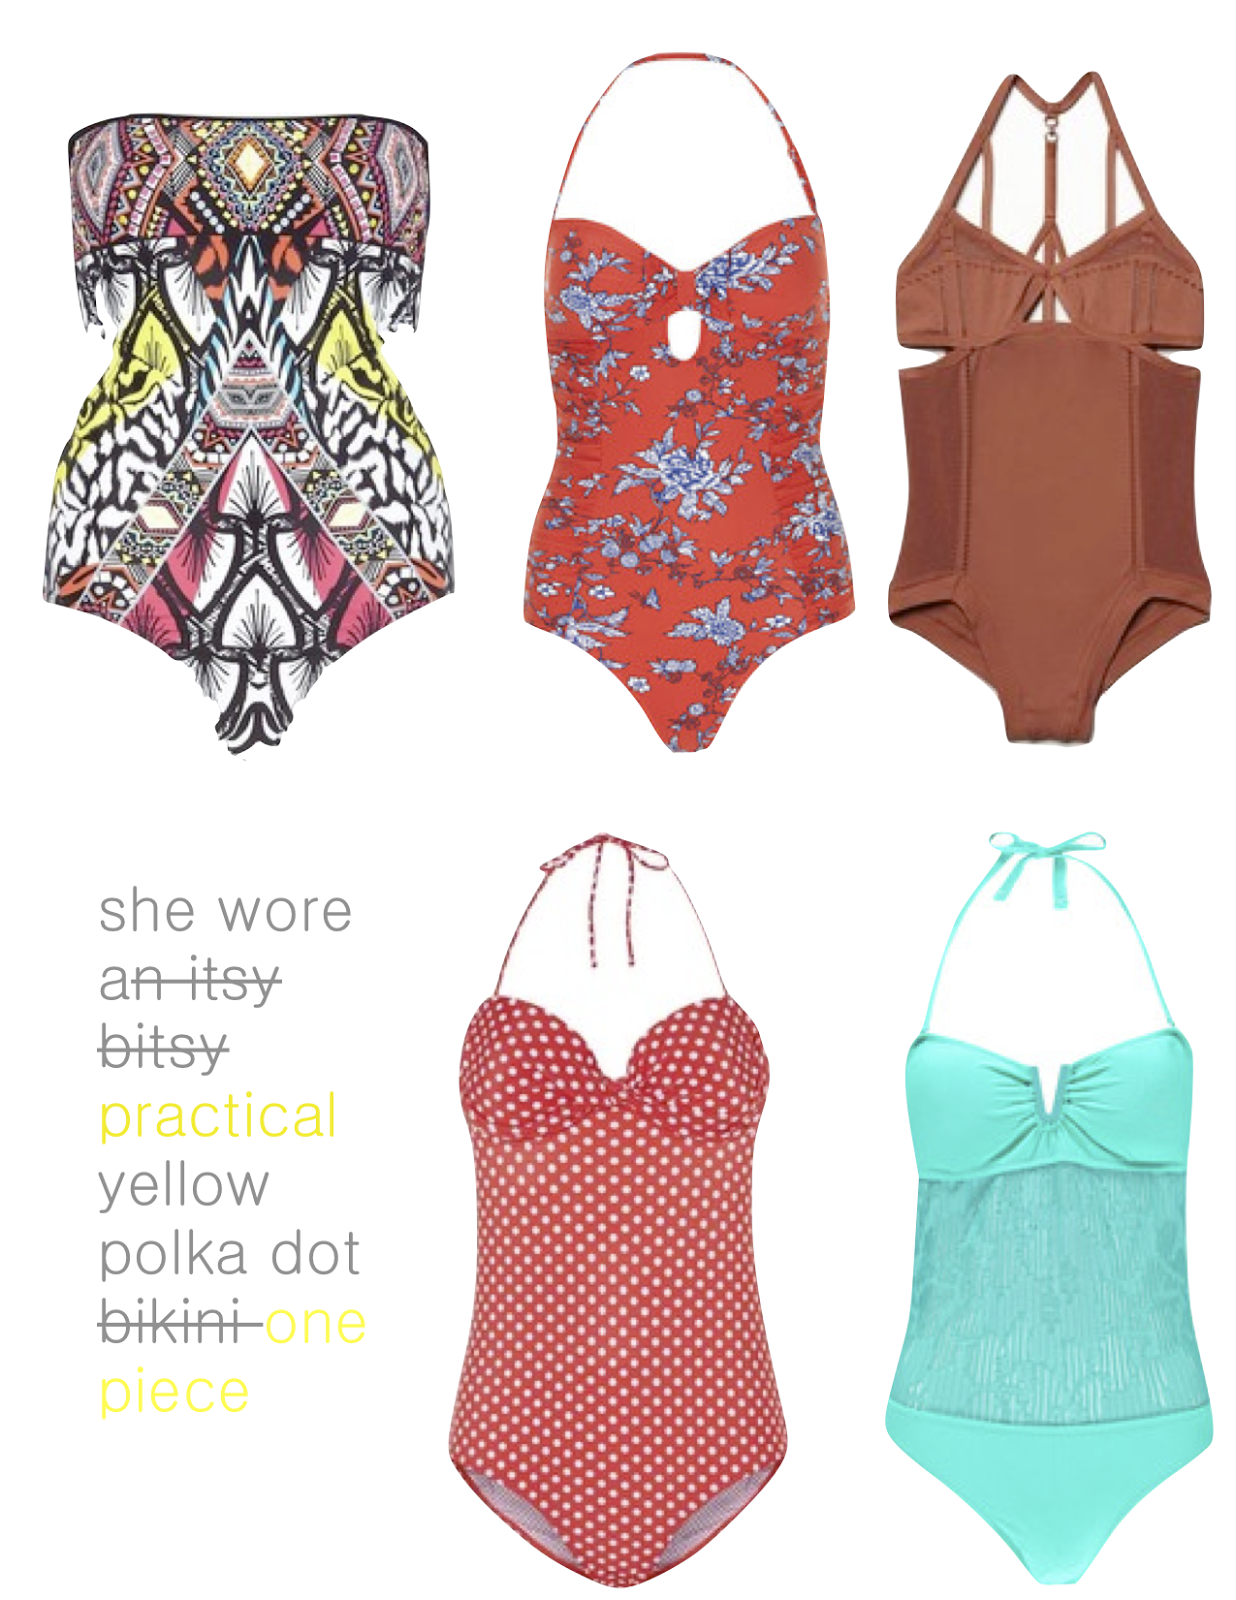 5 Reasons Why I Love One Piece Swimsuits - Dina's Days